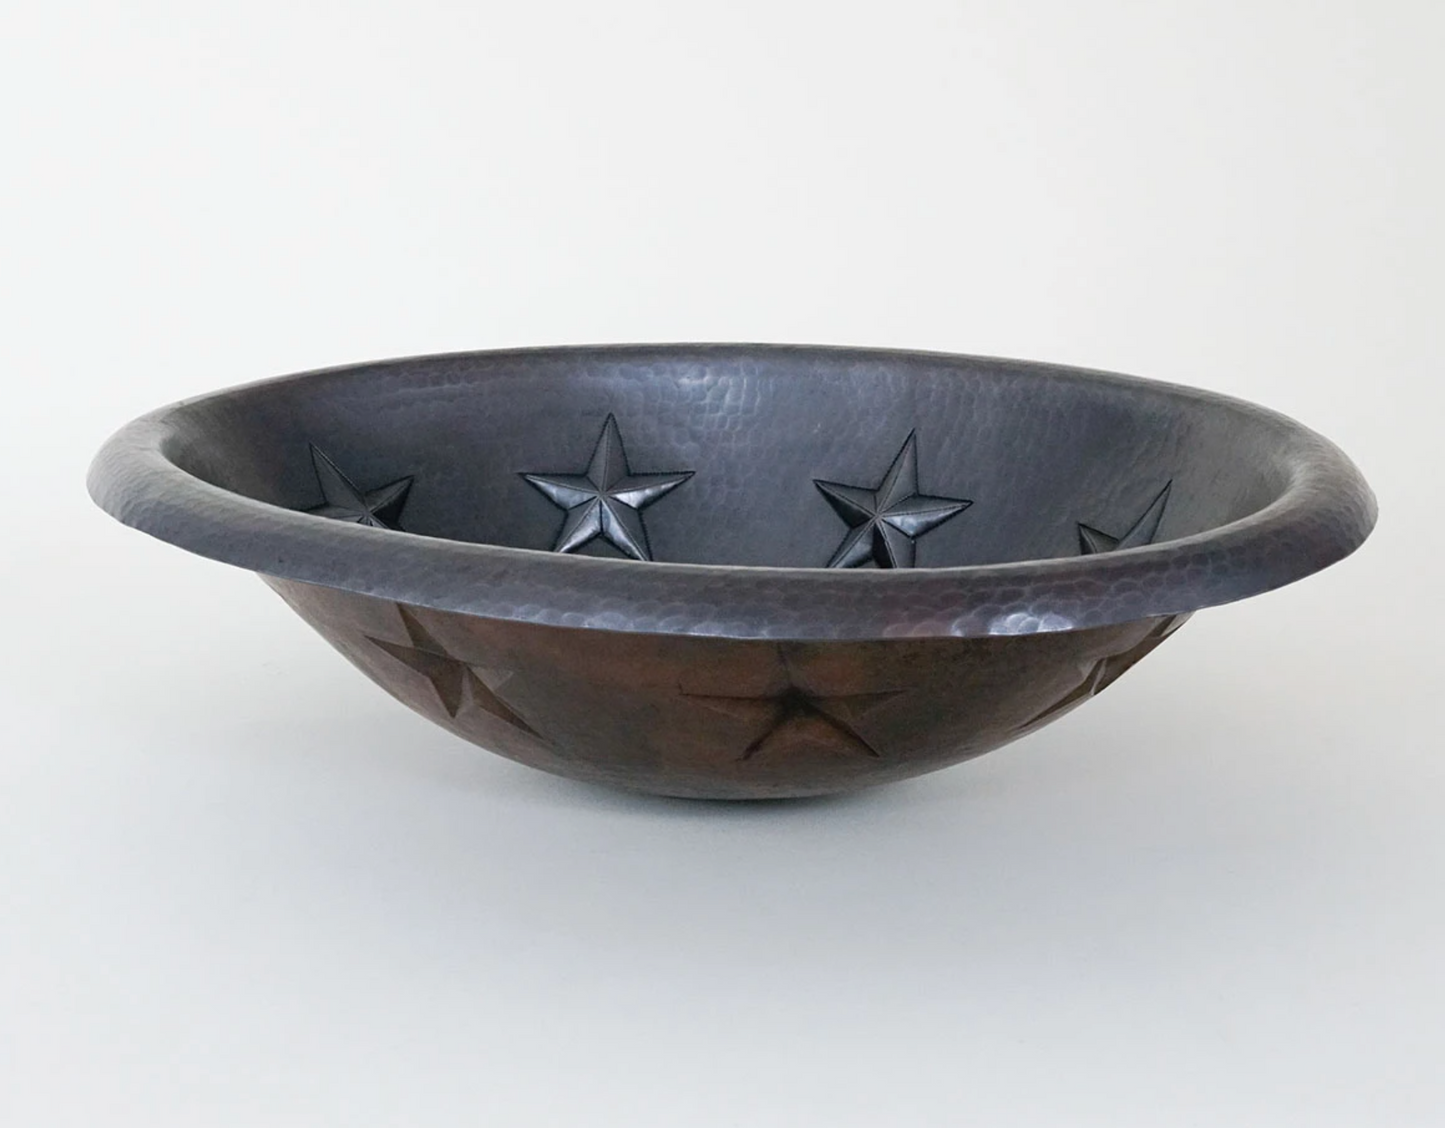 Oval Copper Sink with Stars Design